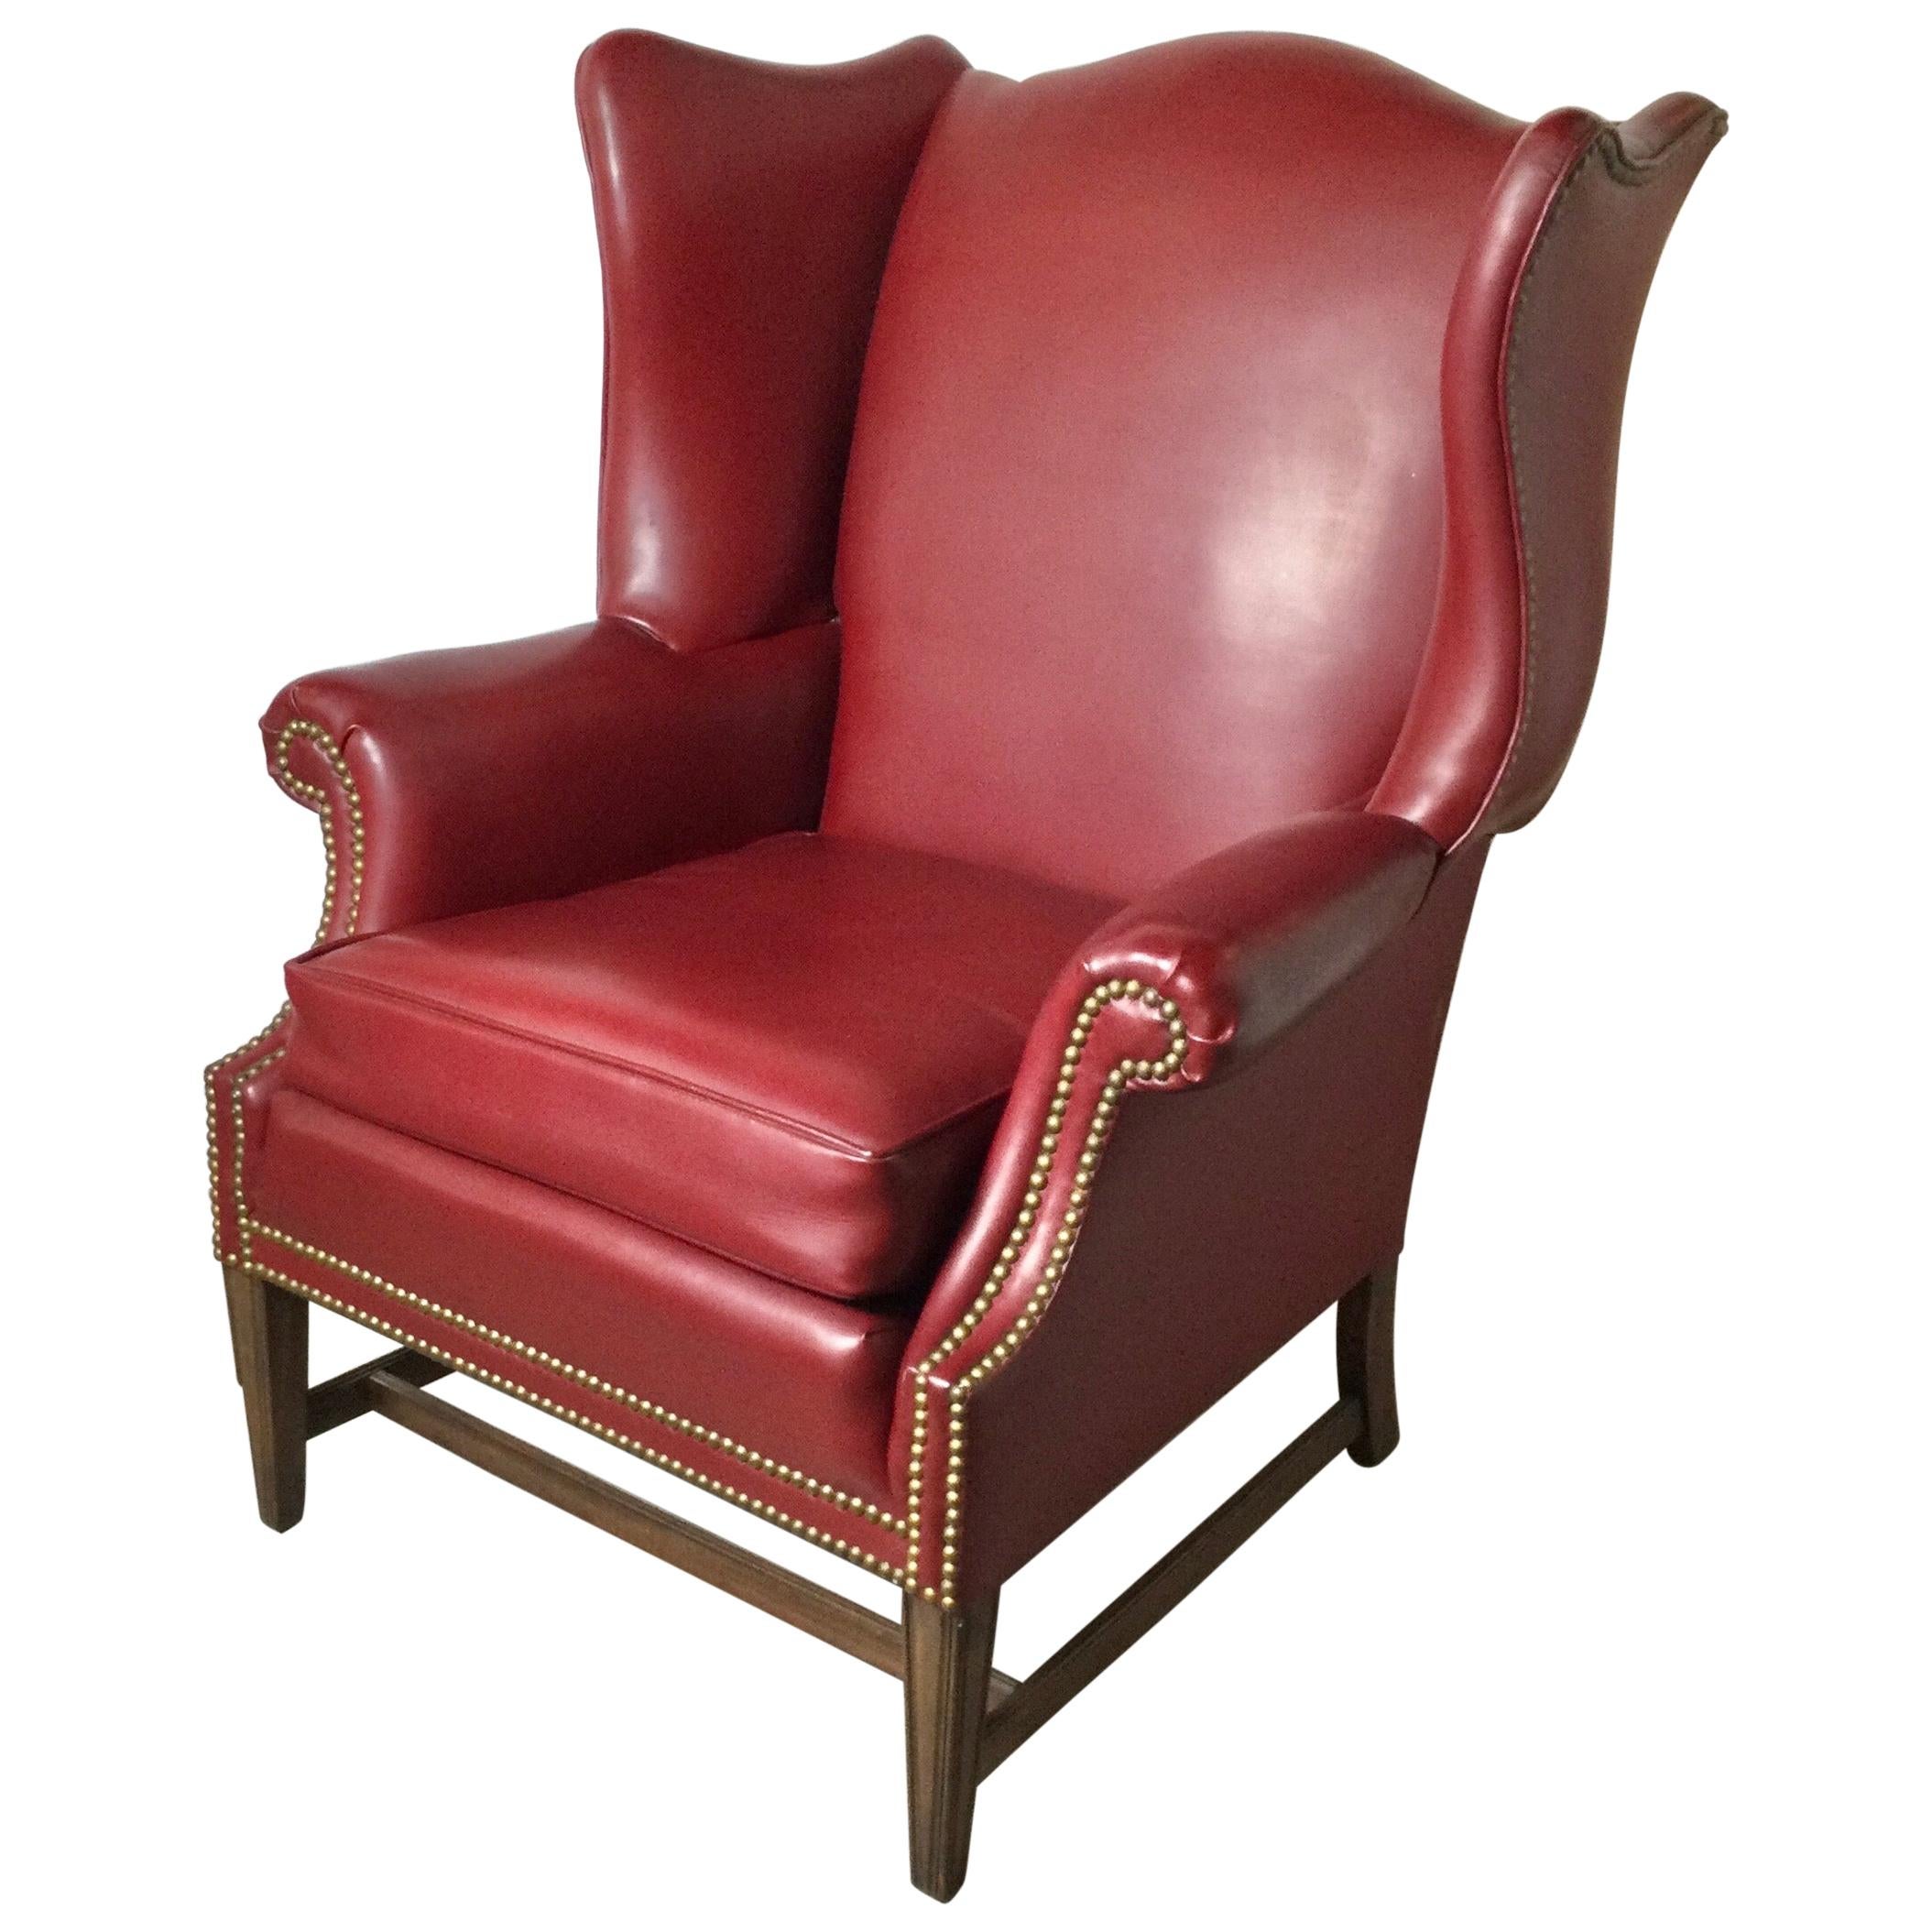 What is a wing chair used for?